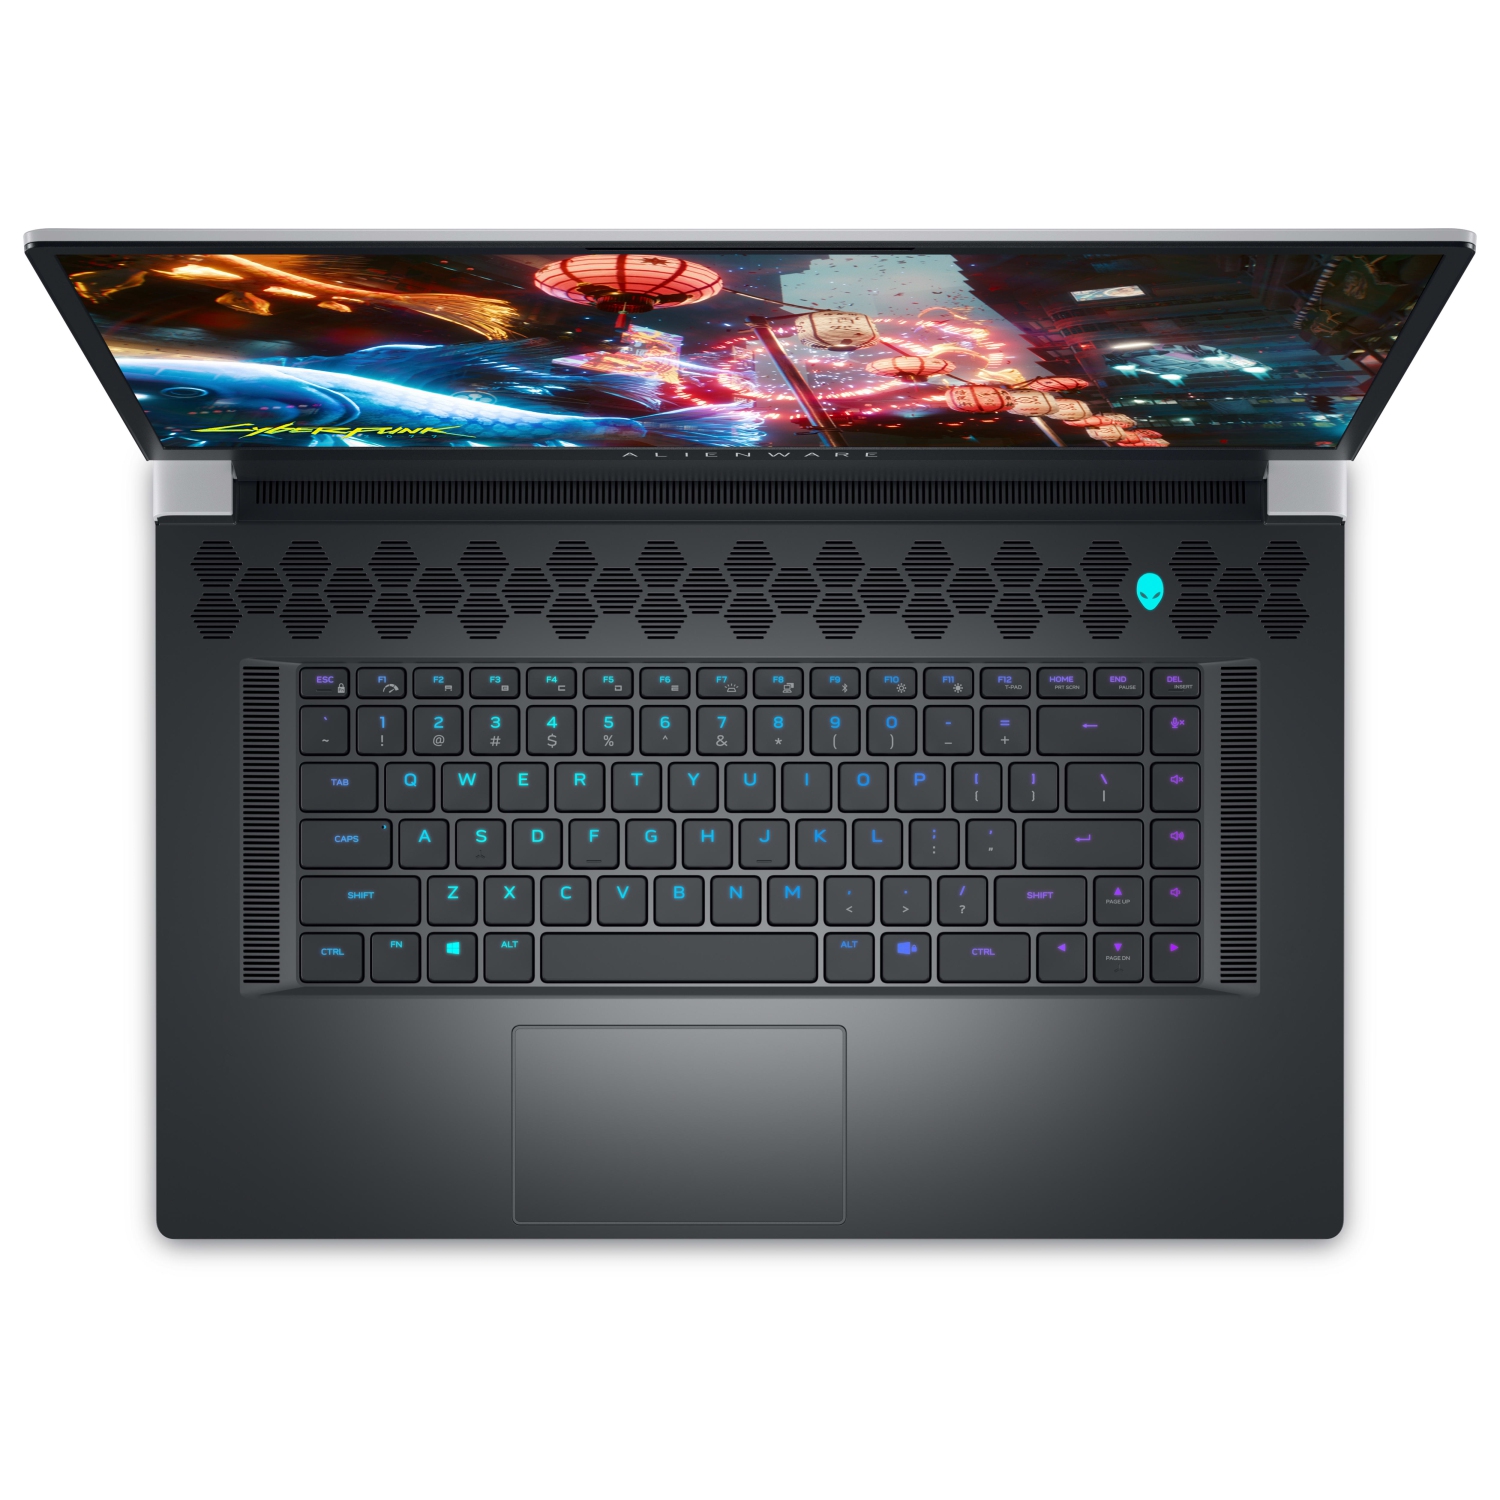 Refurbished (Excellent) – Dell Alienware X17 R2 Gaming Laptop (2022) | 17.3" FHD | Core i9 - 512GB SSD - 32GB RAM - 3080 Ti | 14 Cores @ 5 GHz - 12th Gen CPU - 12GB GDDR6X